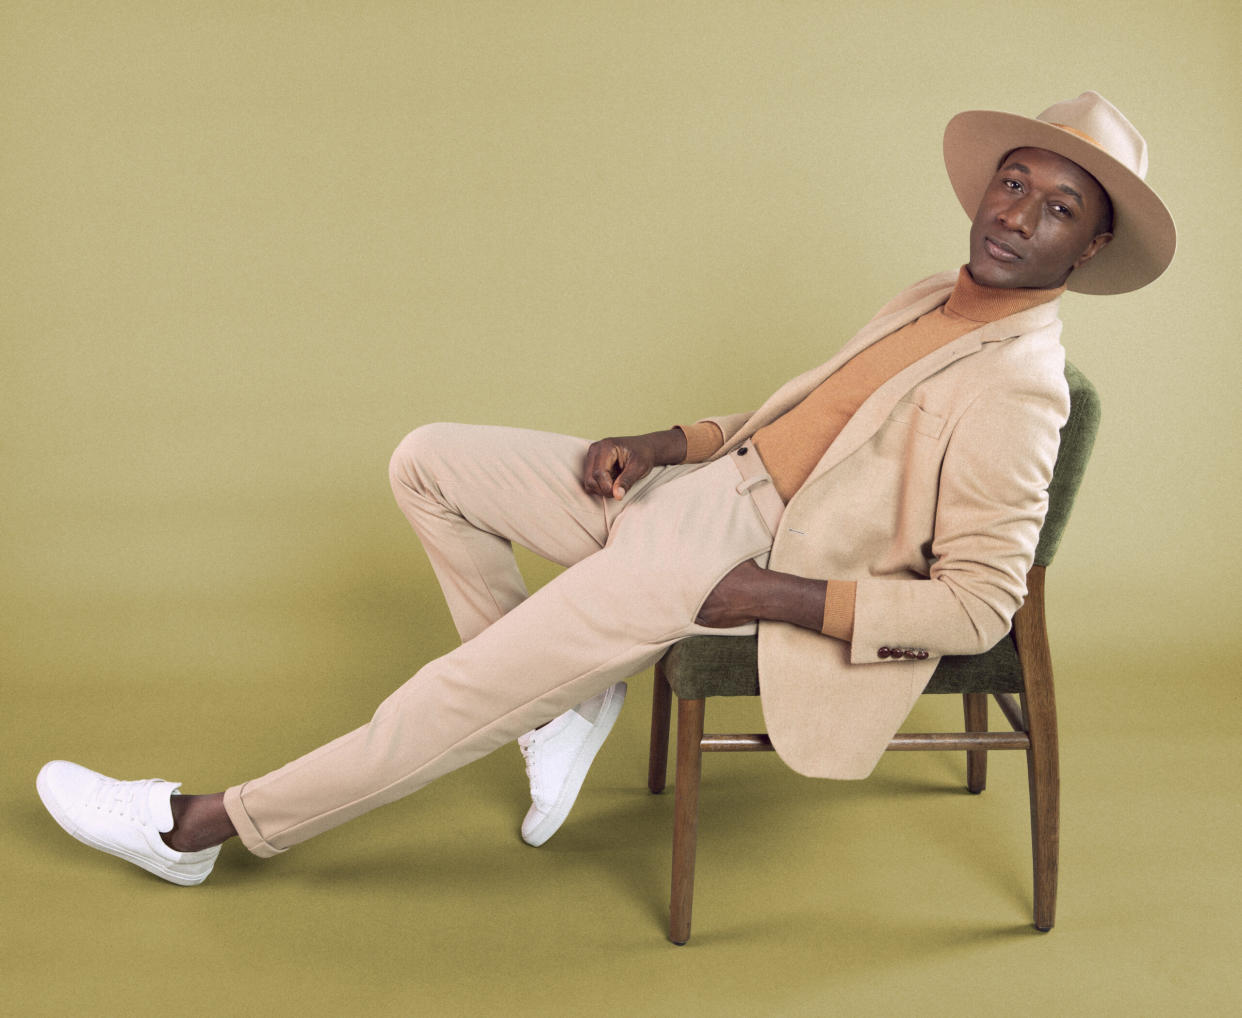 Aloe Blacc Drops New Single 'My Way,' Announces First Album in 7 Years